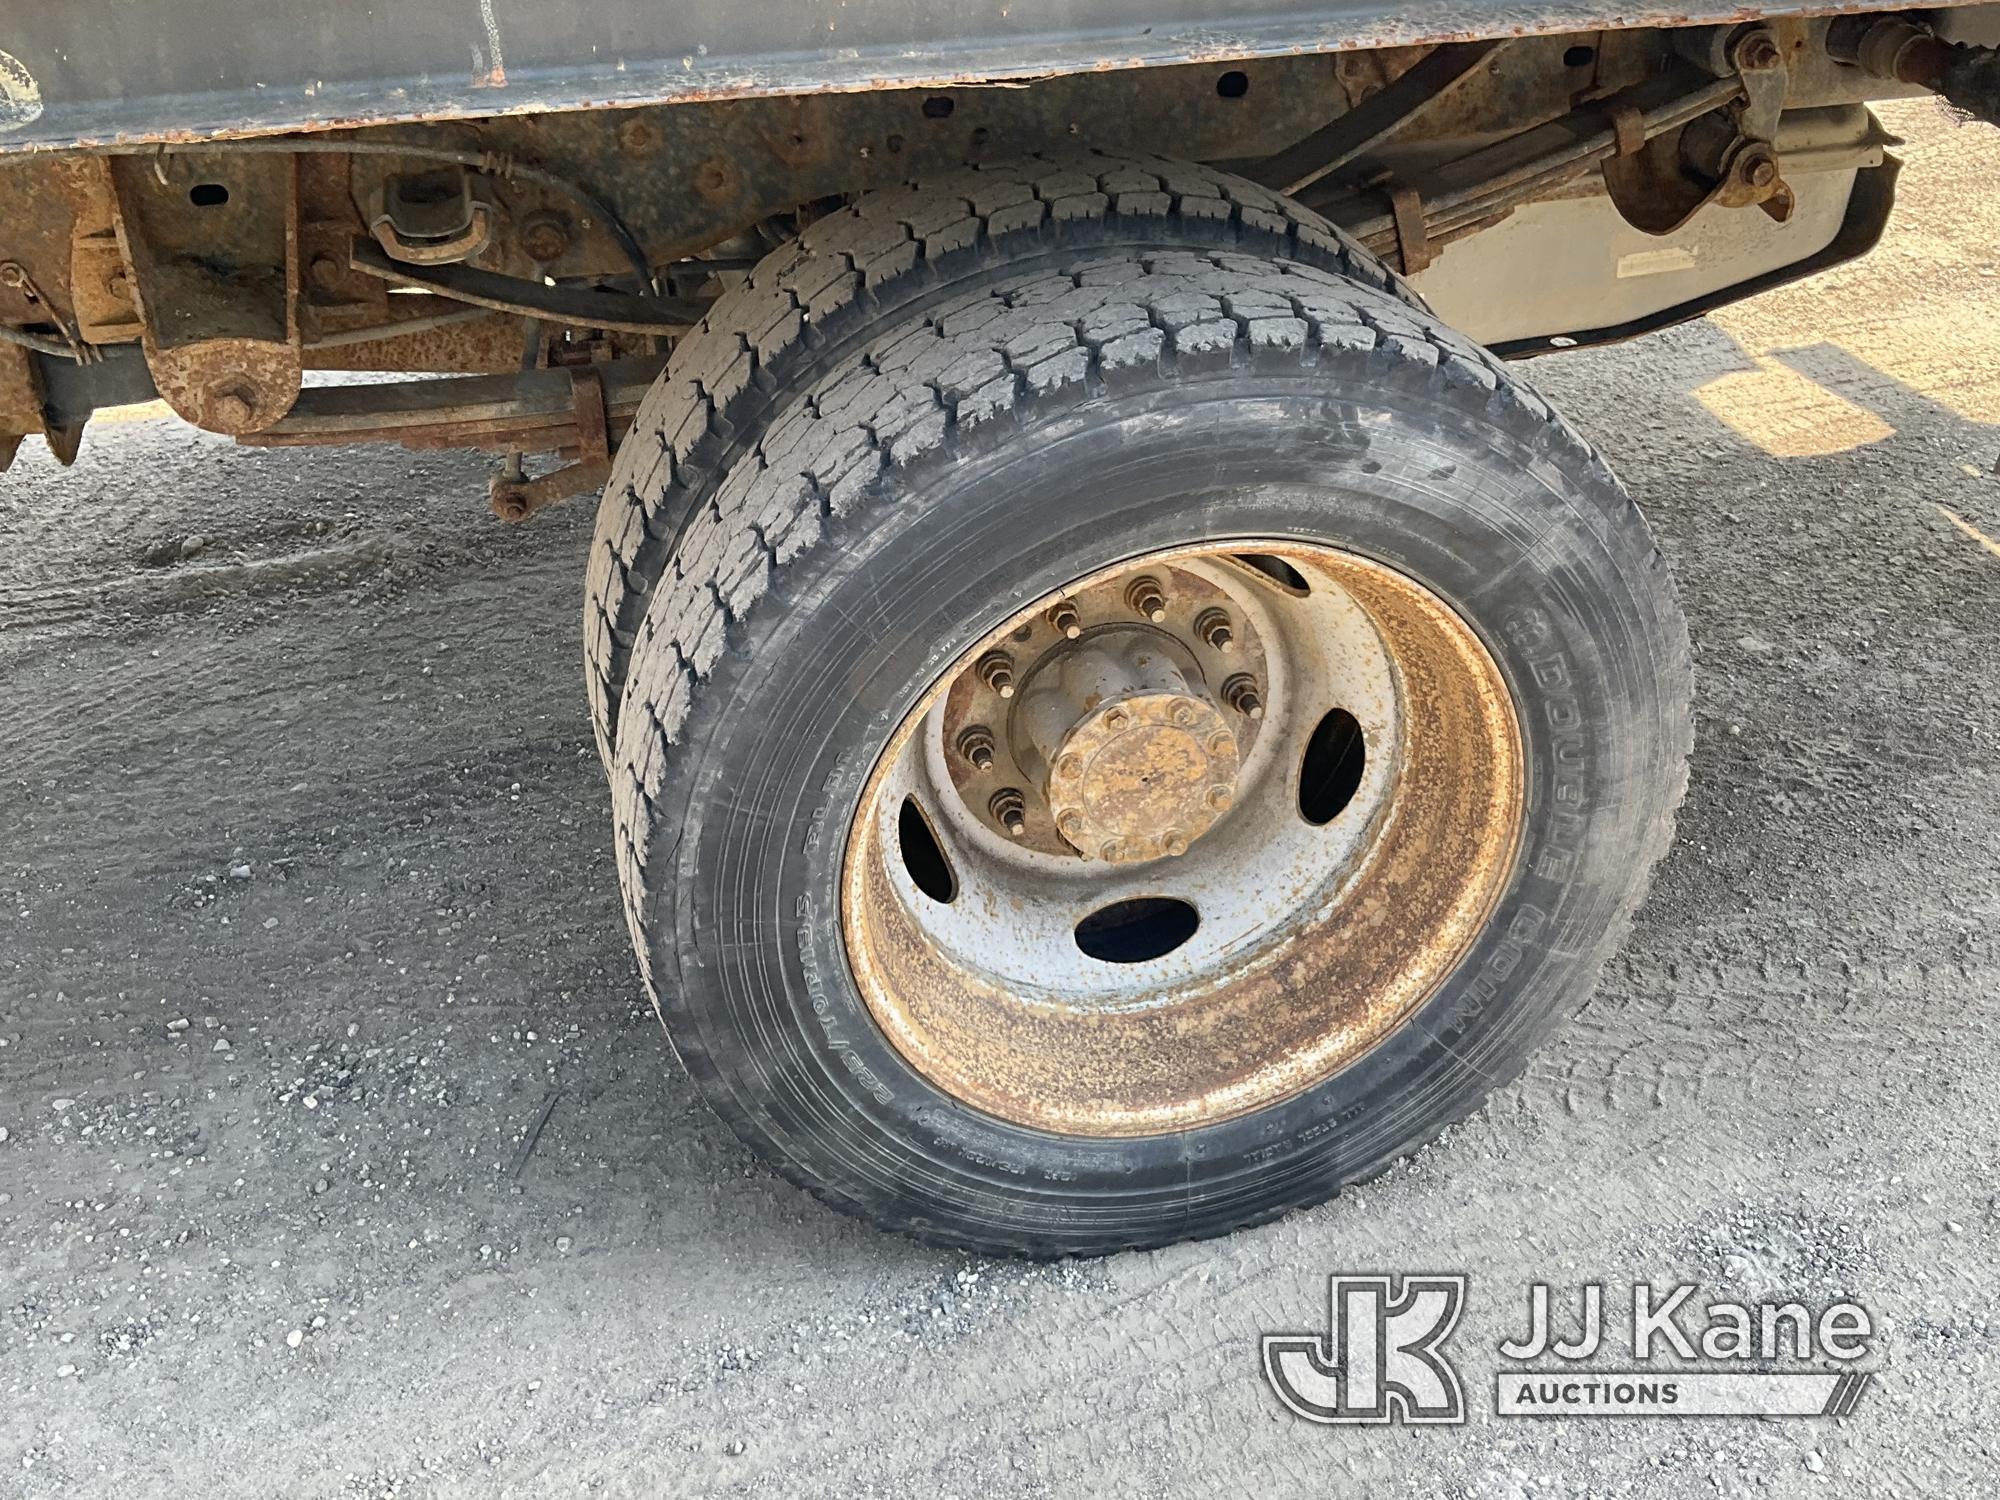 (Plymouth Meeting, PA) 2012 Ford F450 4x4 Crew-Cab Flatbed Truck Runs & Moves,Body & Rust Damage, Se